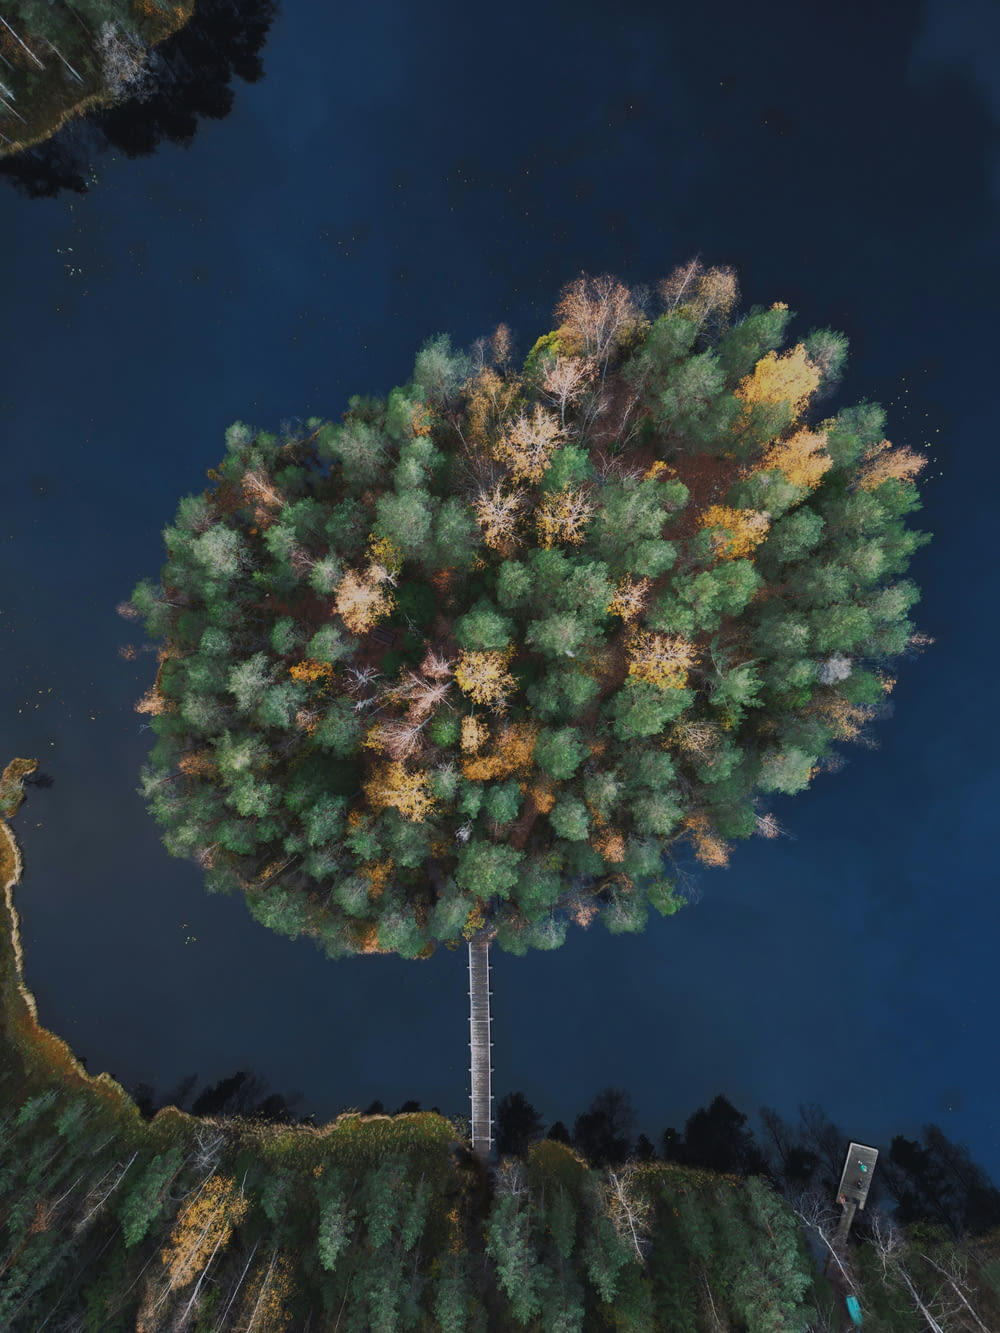 a tree is shown in the middle of the night